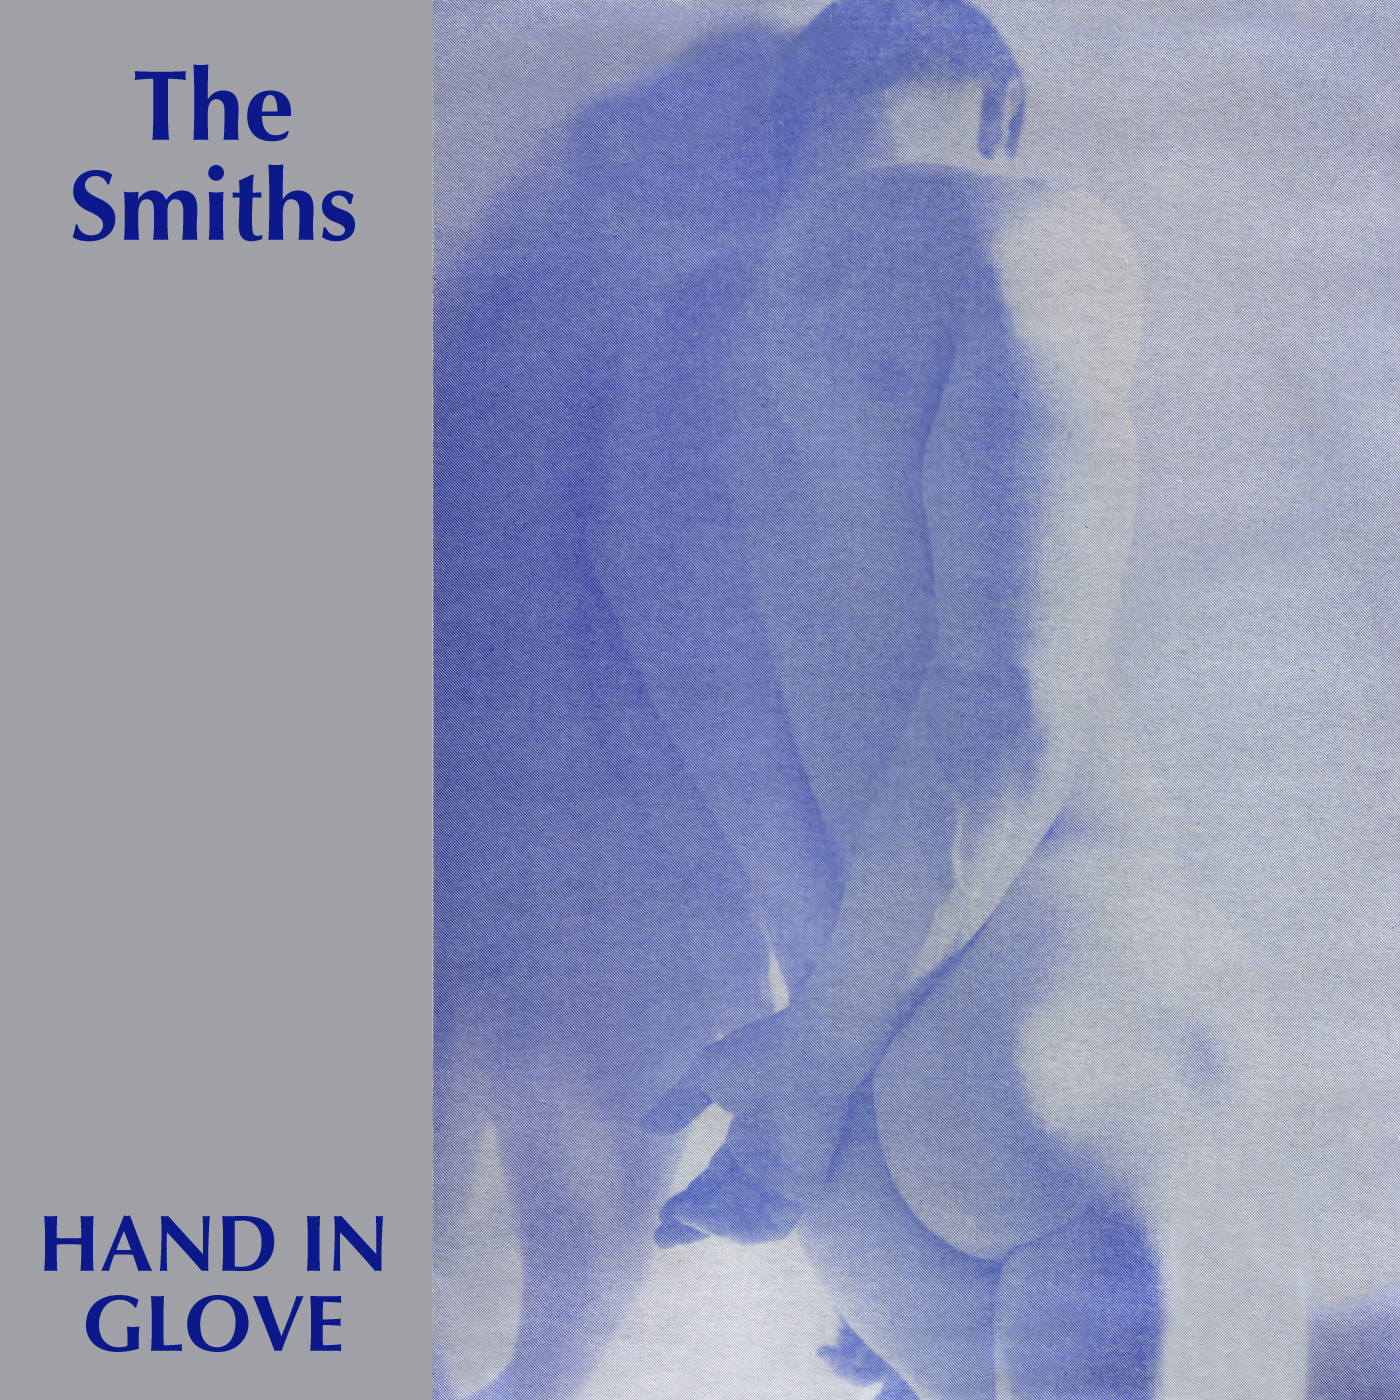 The Smiths ‘Extra Track (and a tacky badge)’ MP3 blog launches with ‘Hand in Glove’